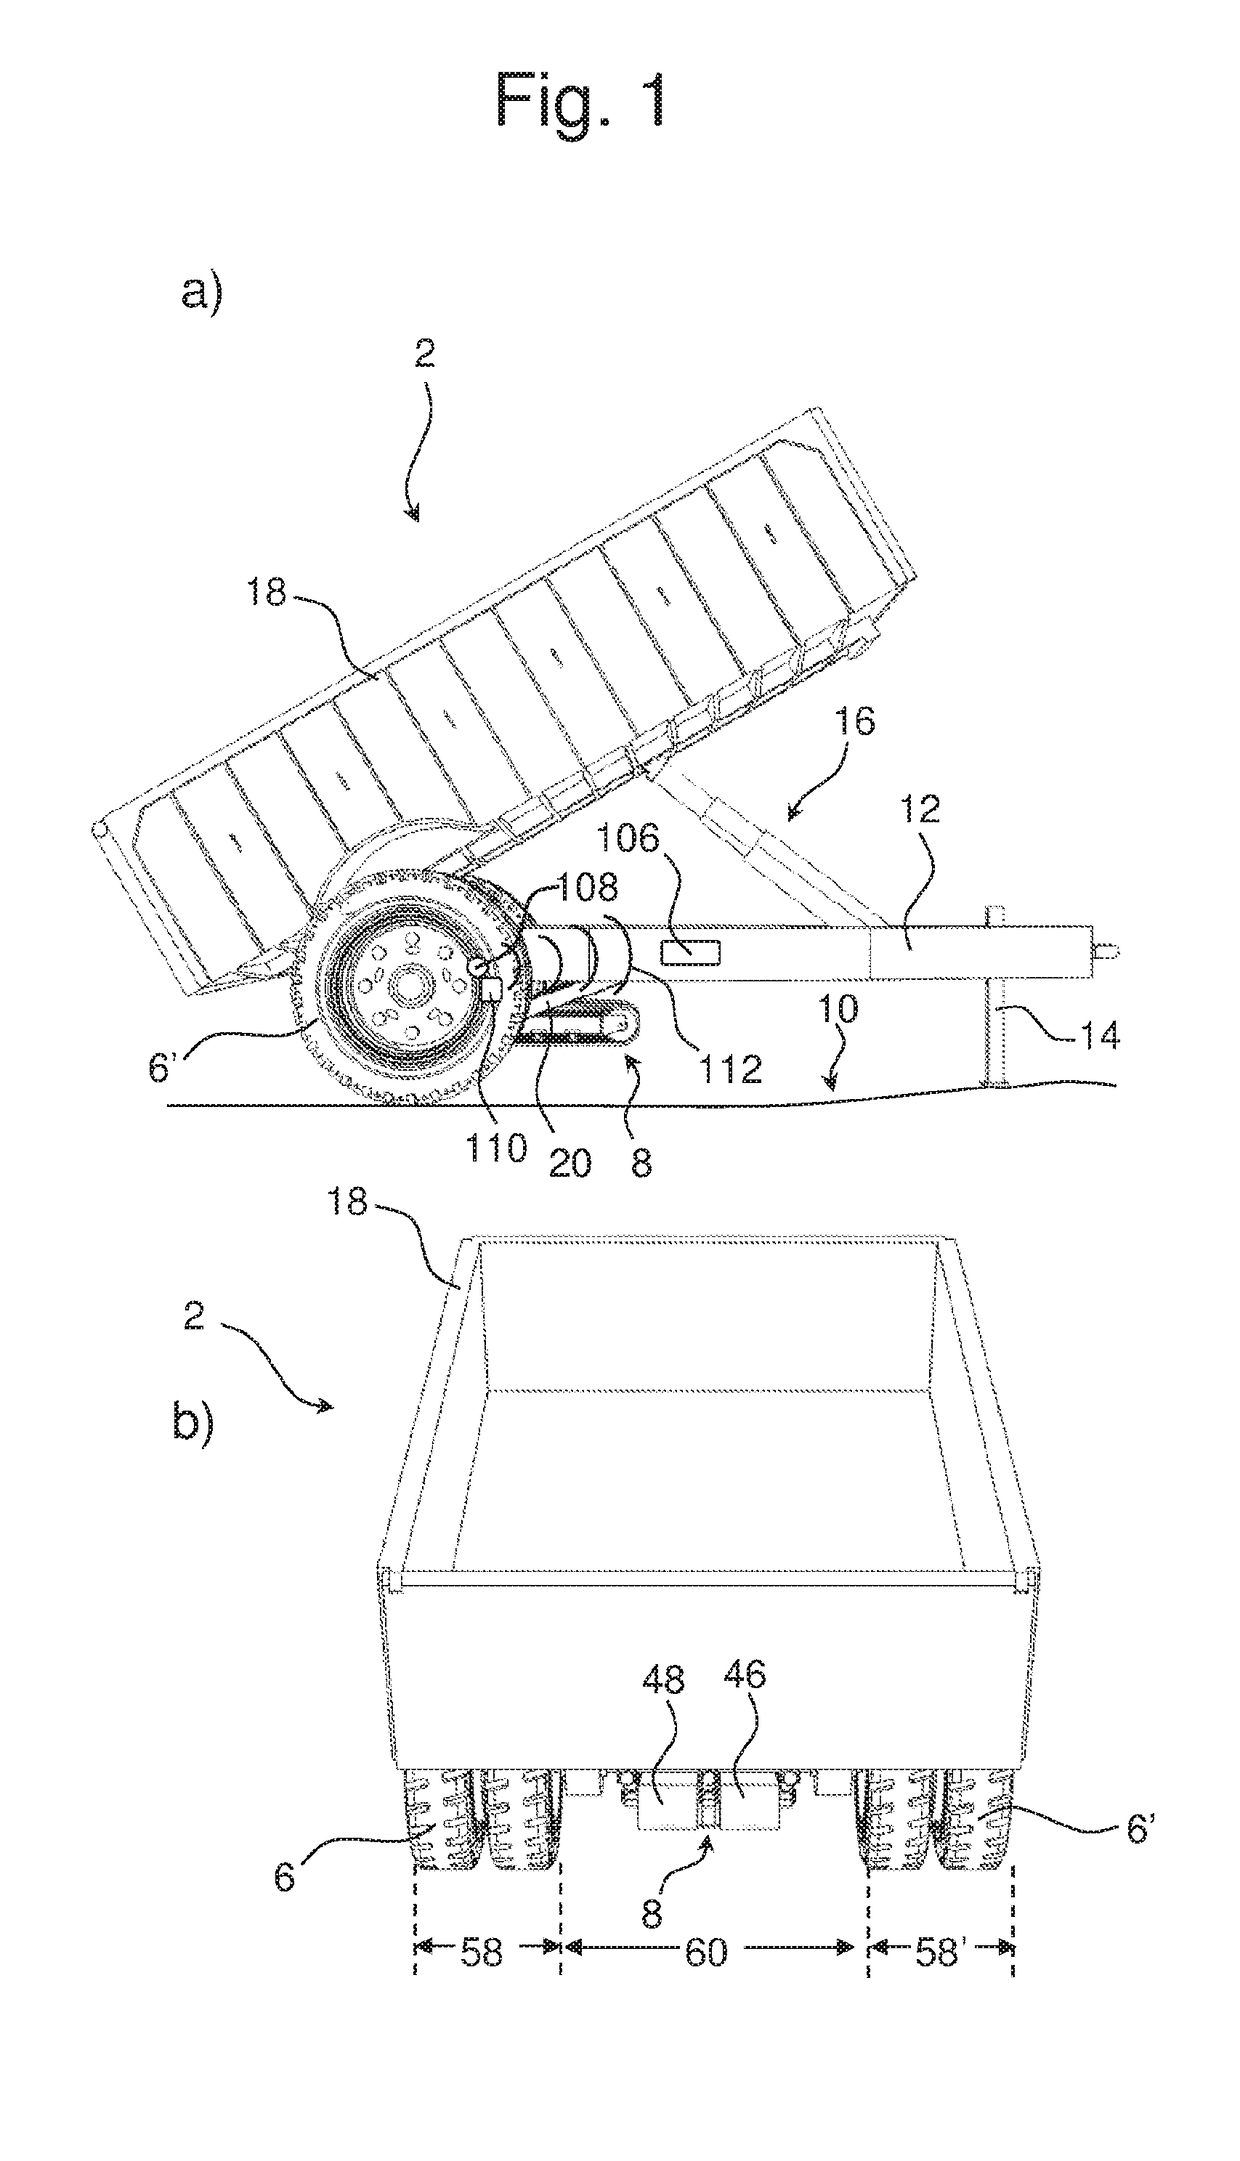 Vehicle Comprising a Track Device